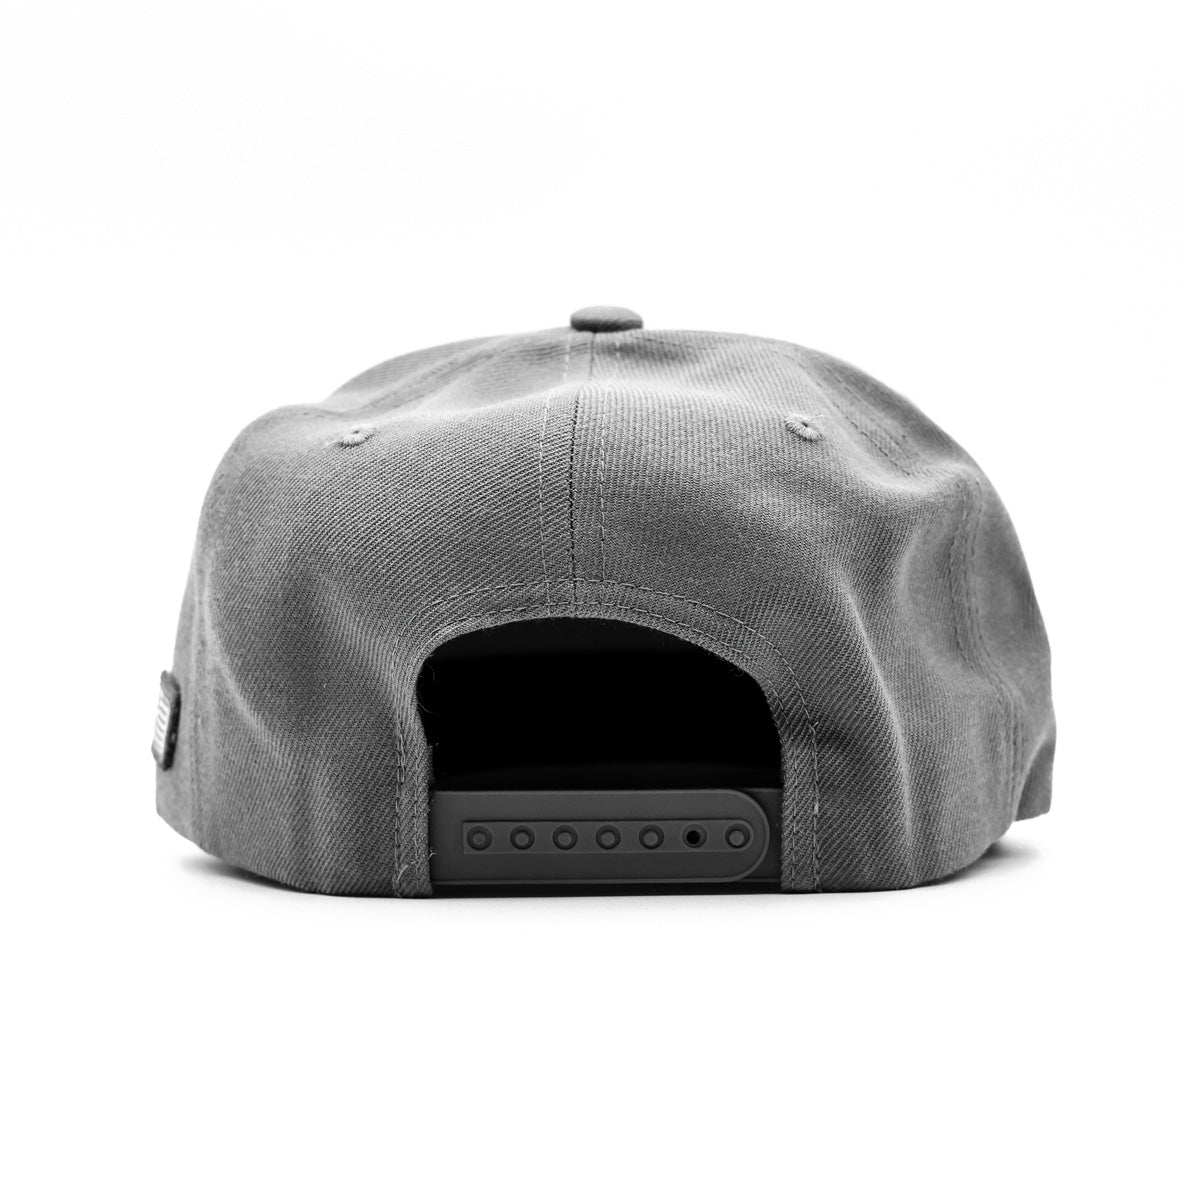 Crenshaw Limited Edition Snapback - Charcoal/White - Back